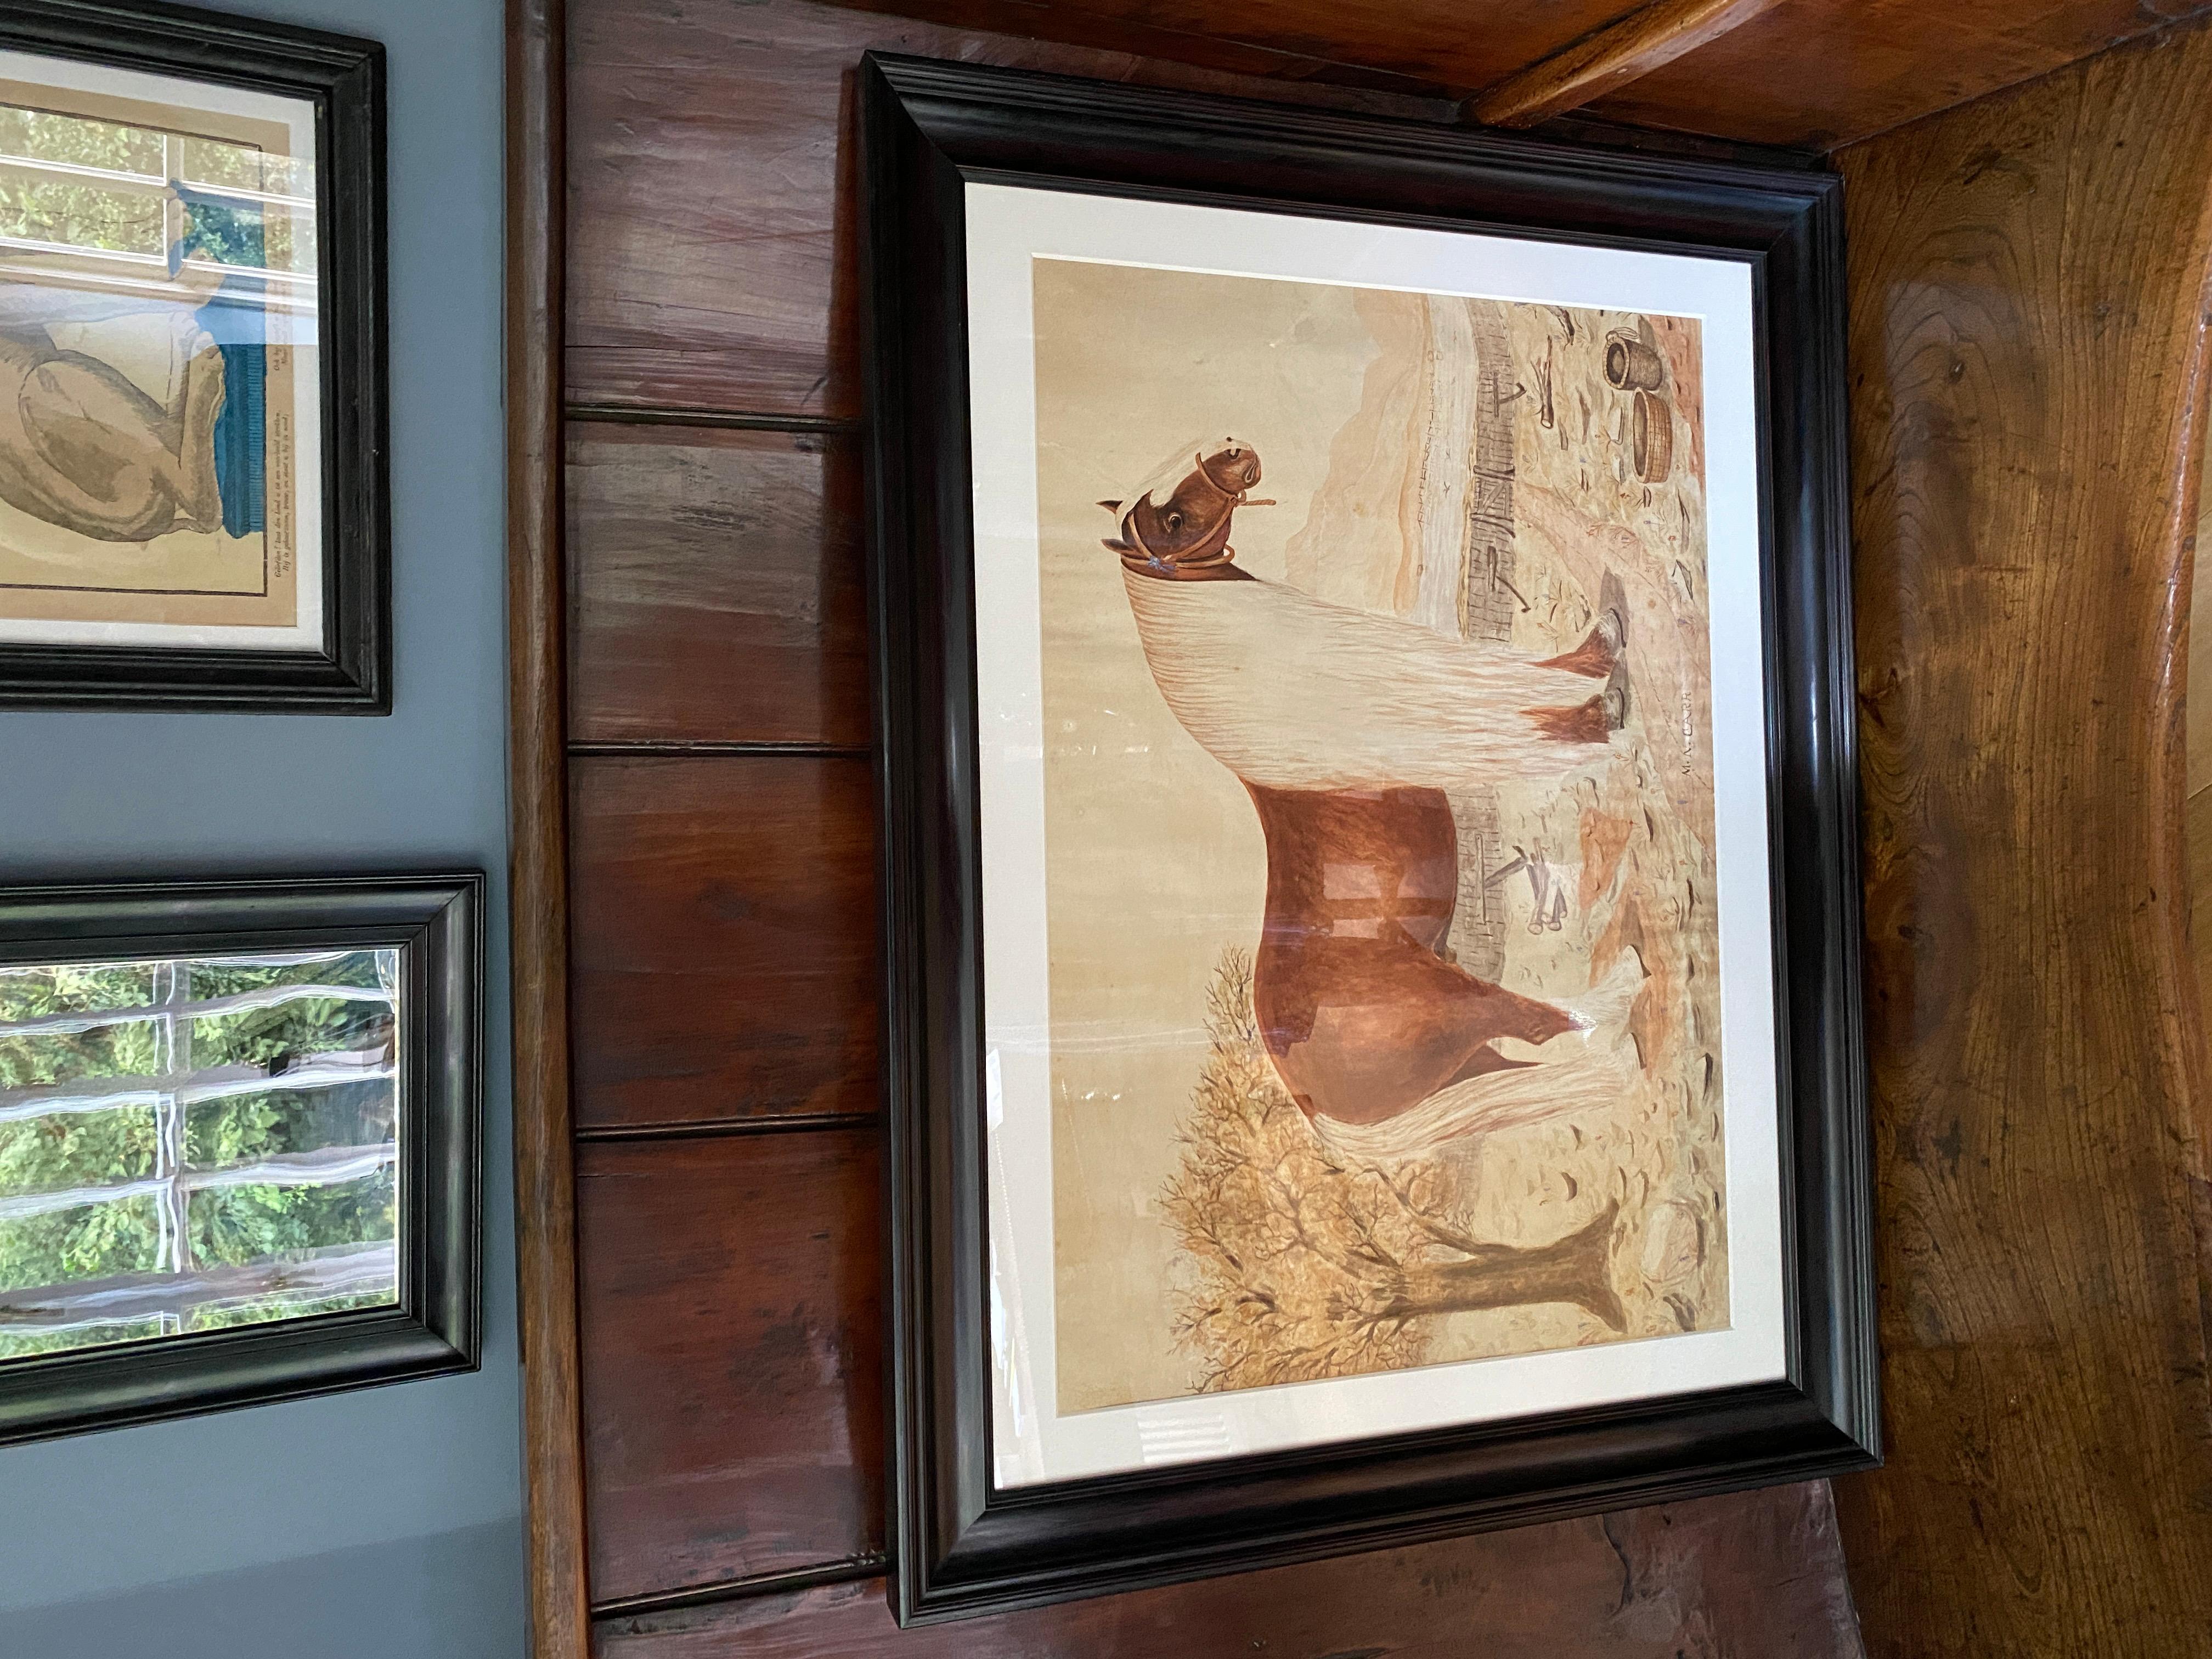 Large watercolor of a Barge Horse,
Named Bob,
Signed M.N. Carr,
circa 1860
   

A large watercolor painting of a famous Barge Horse, Bob. An impressive horse that once pulled barges along the River Ancholme towpath in the Brigg area was so